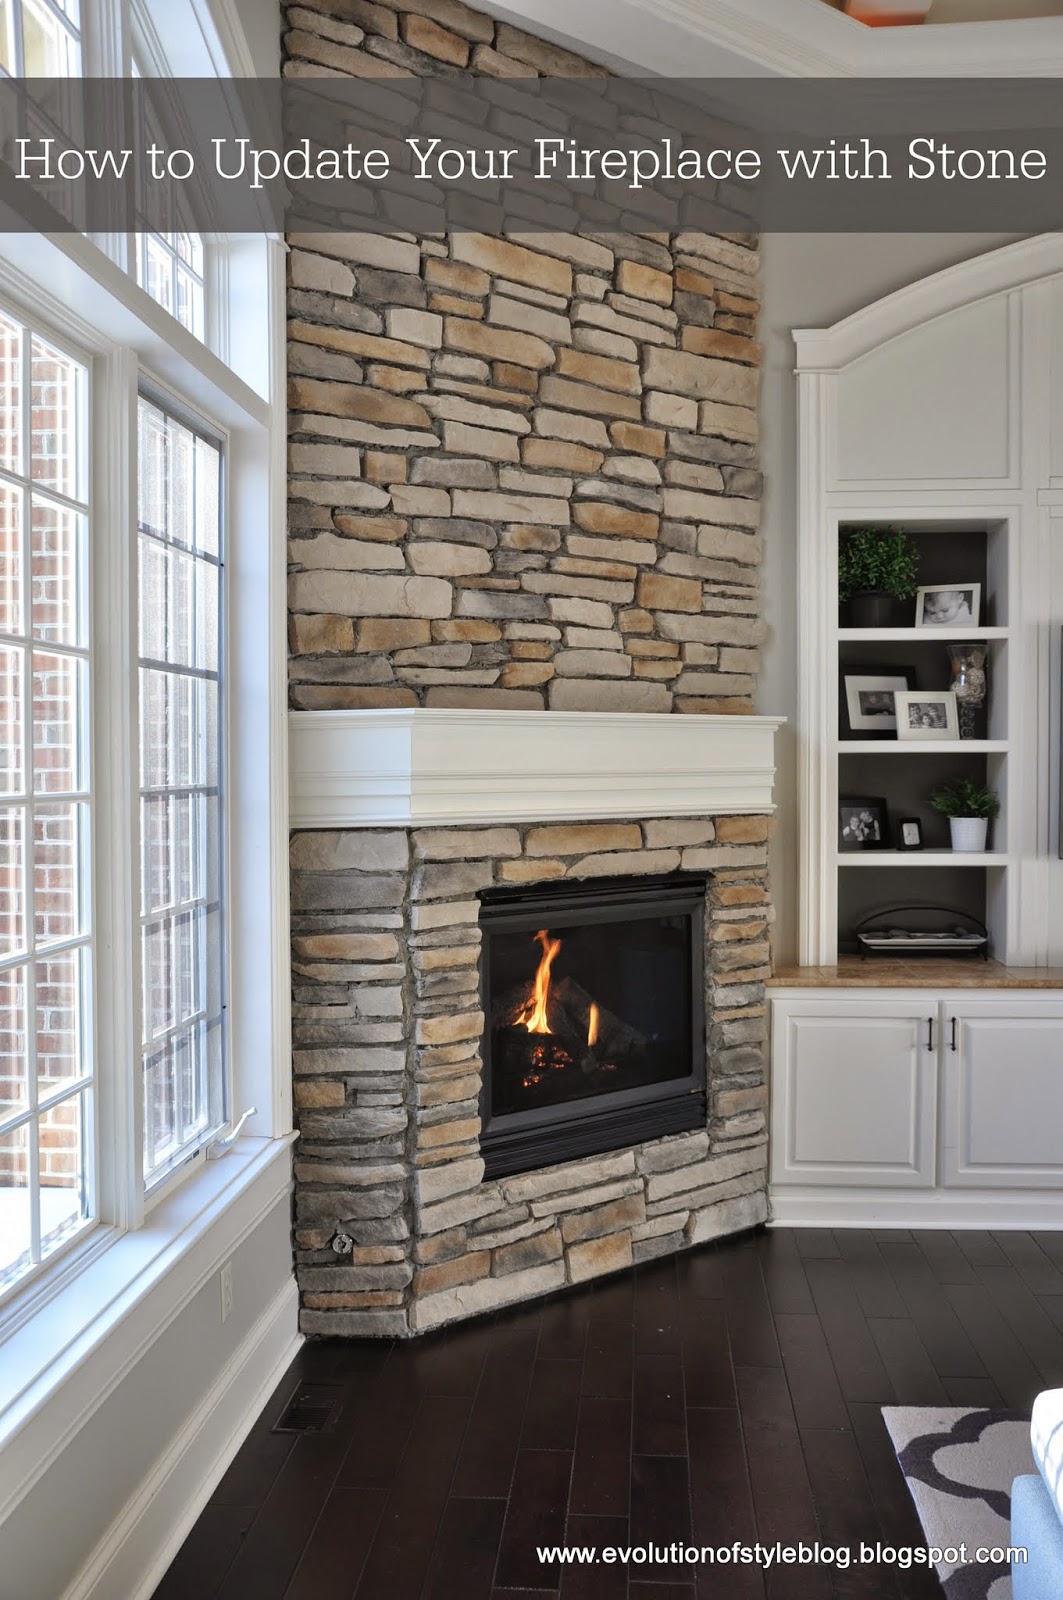 Diy Stacked Stone Fireplace Awesome How to Update Your Fireplace with Stone Evolution Of Style